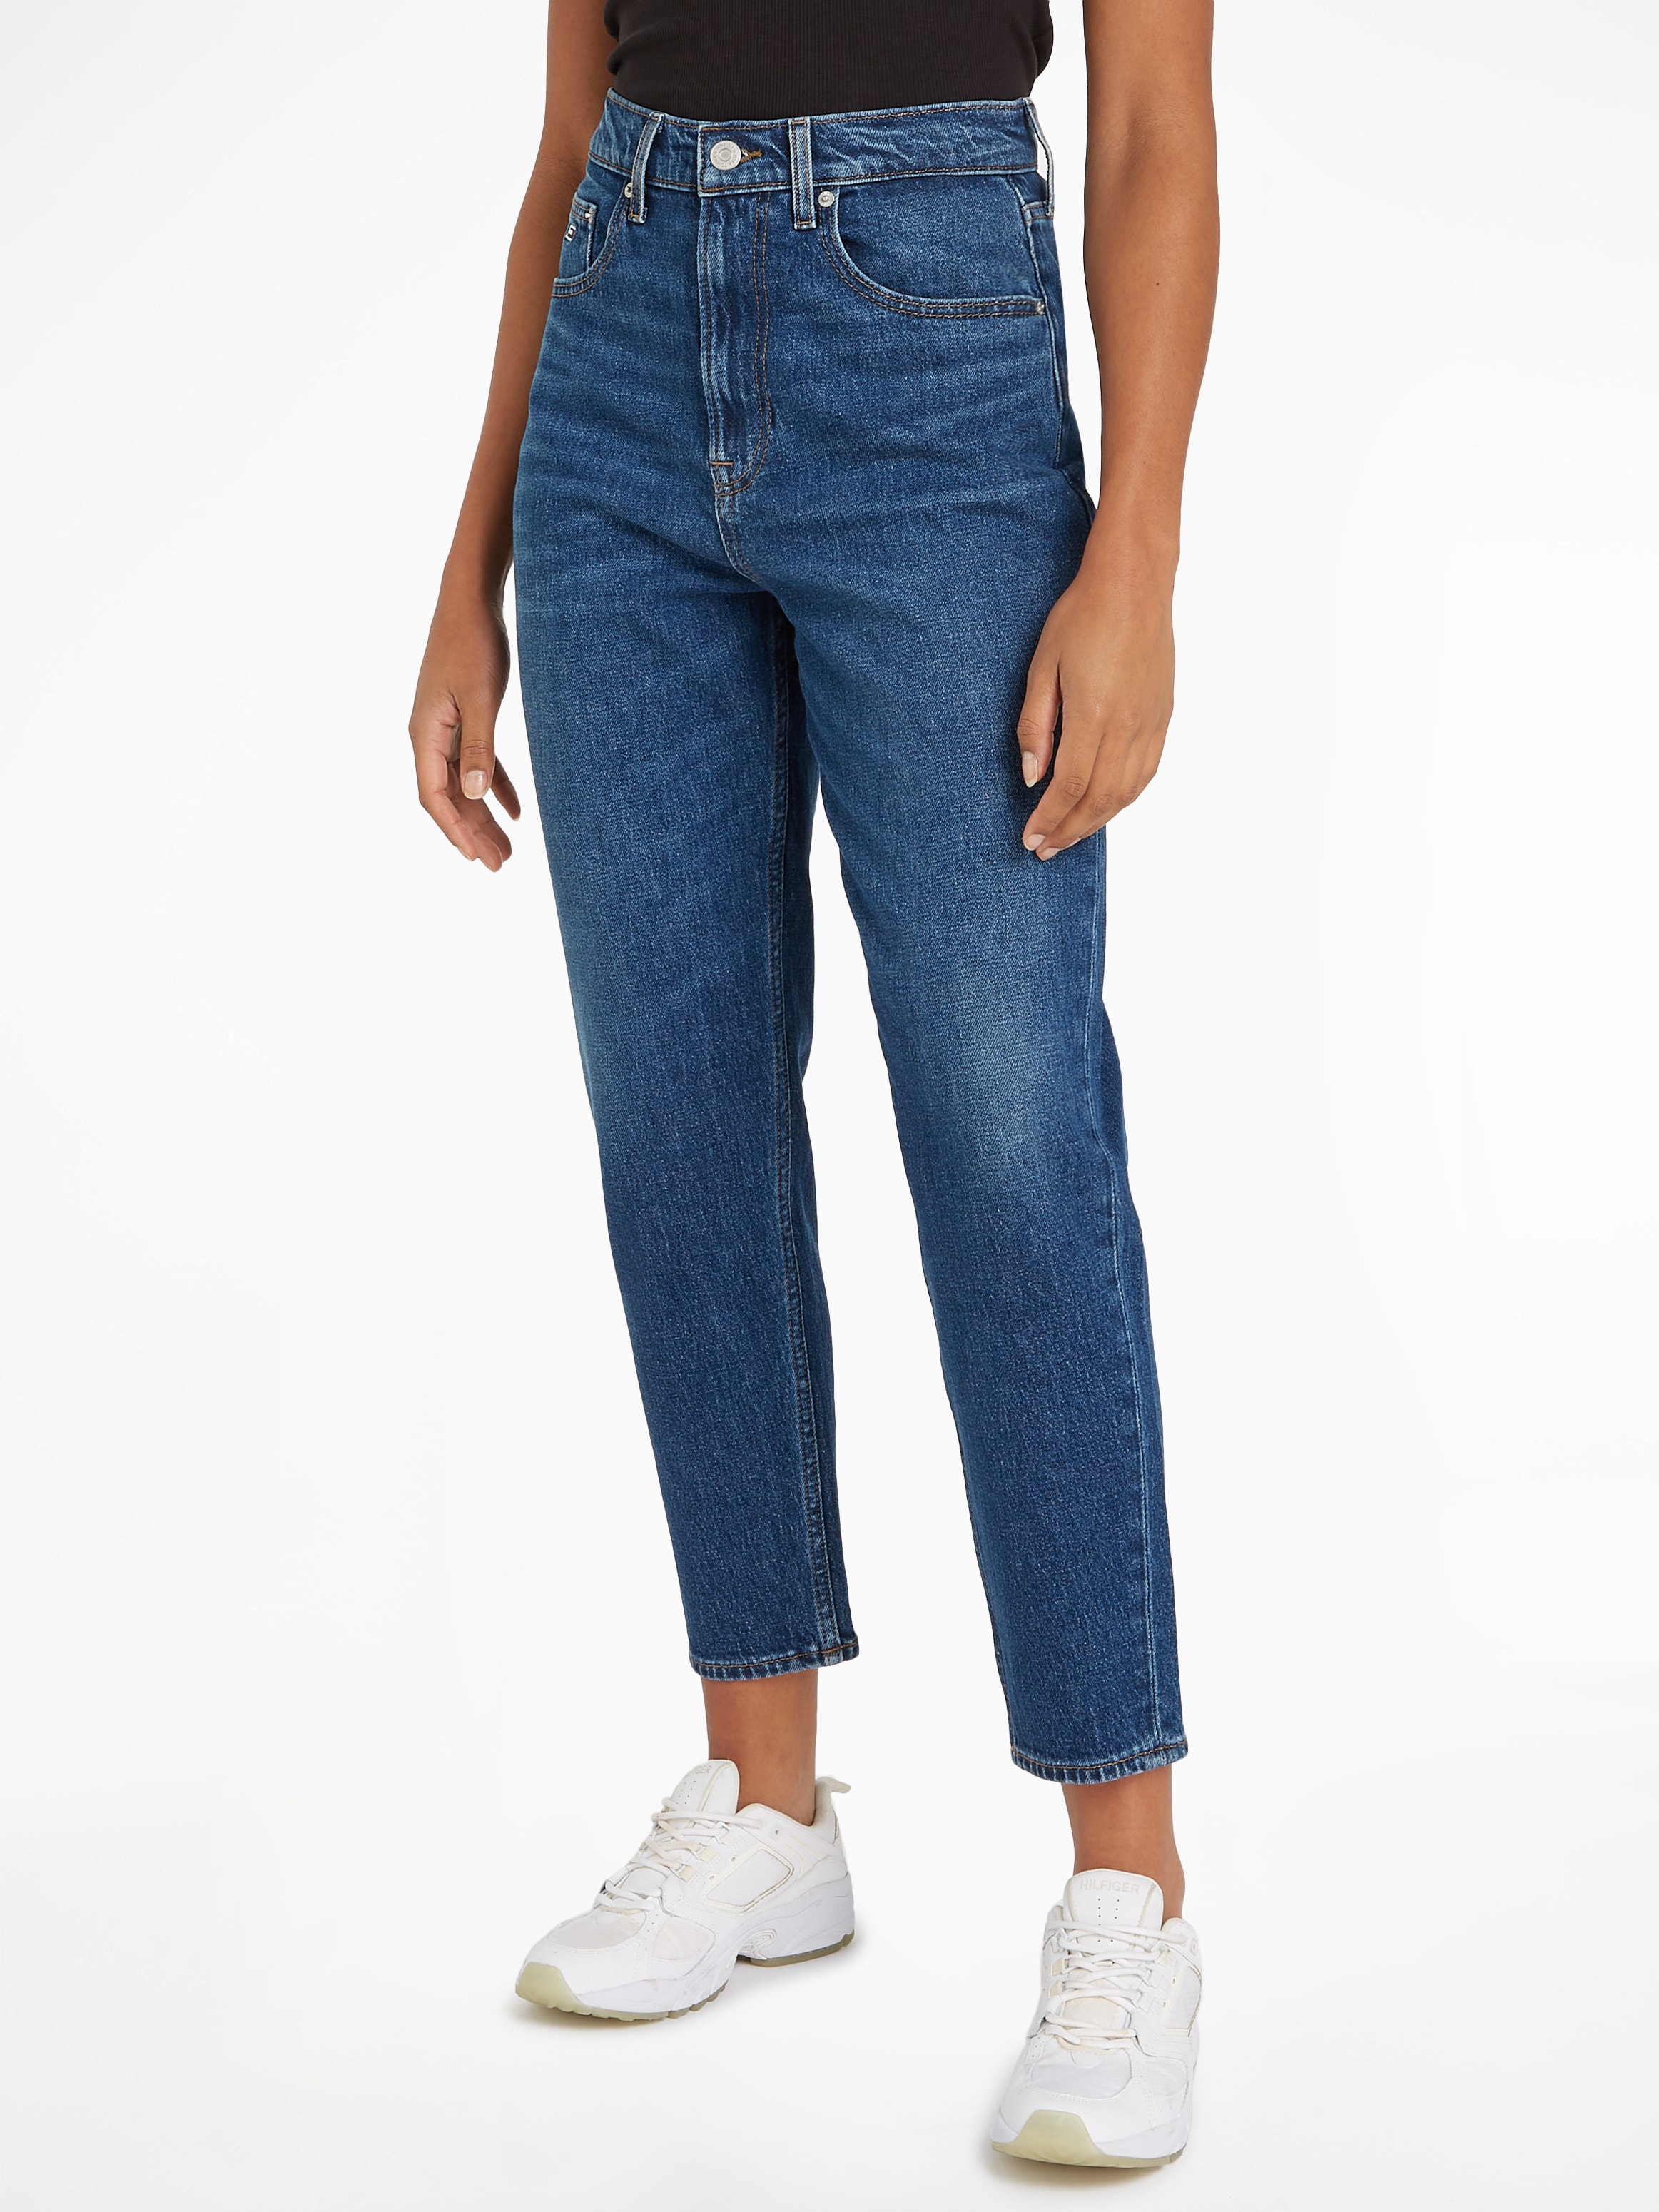 Mom-Jeans »Tommy Jeans - High waist - Mom-Jeans«, Mom Jeans mit hoher Taille und Tommy...